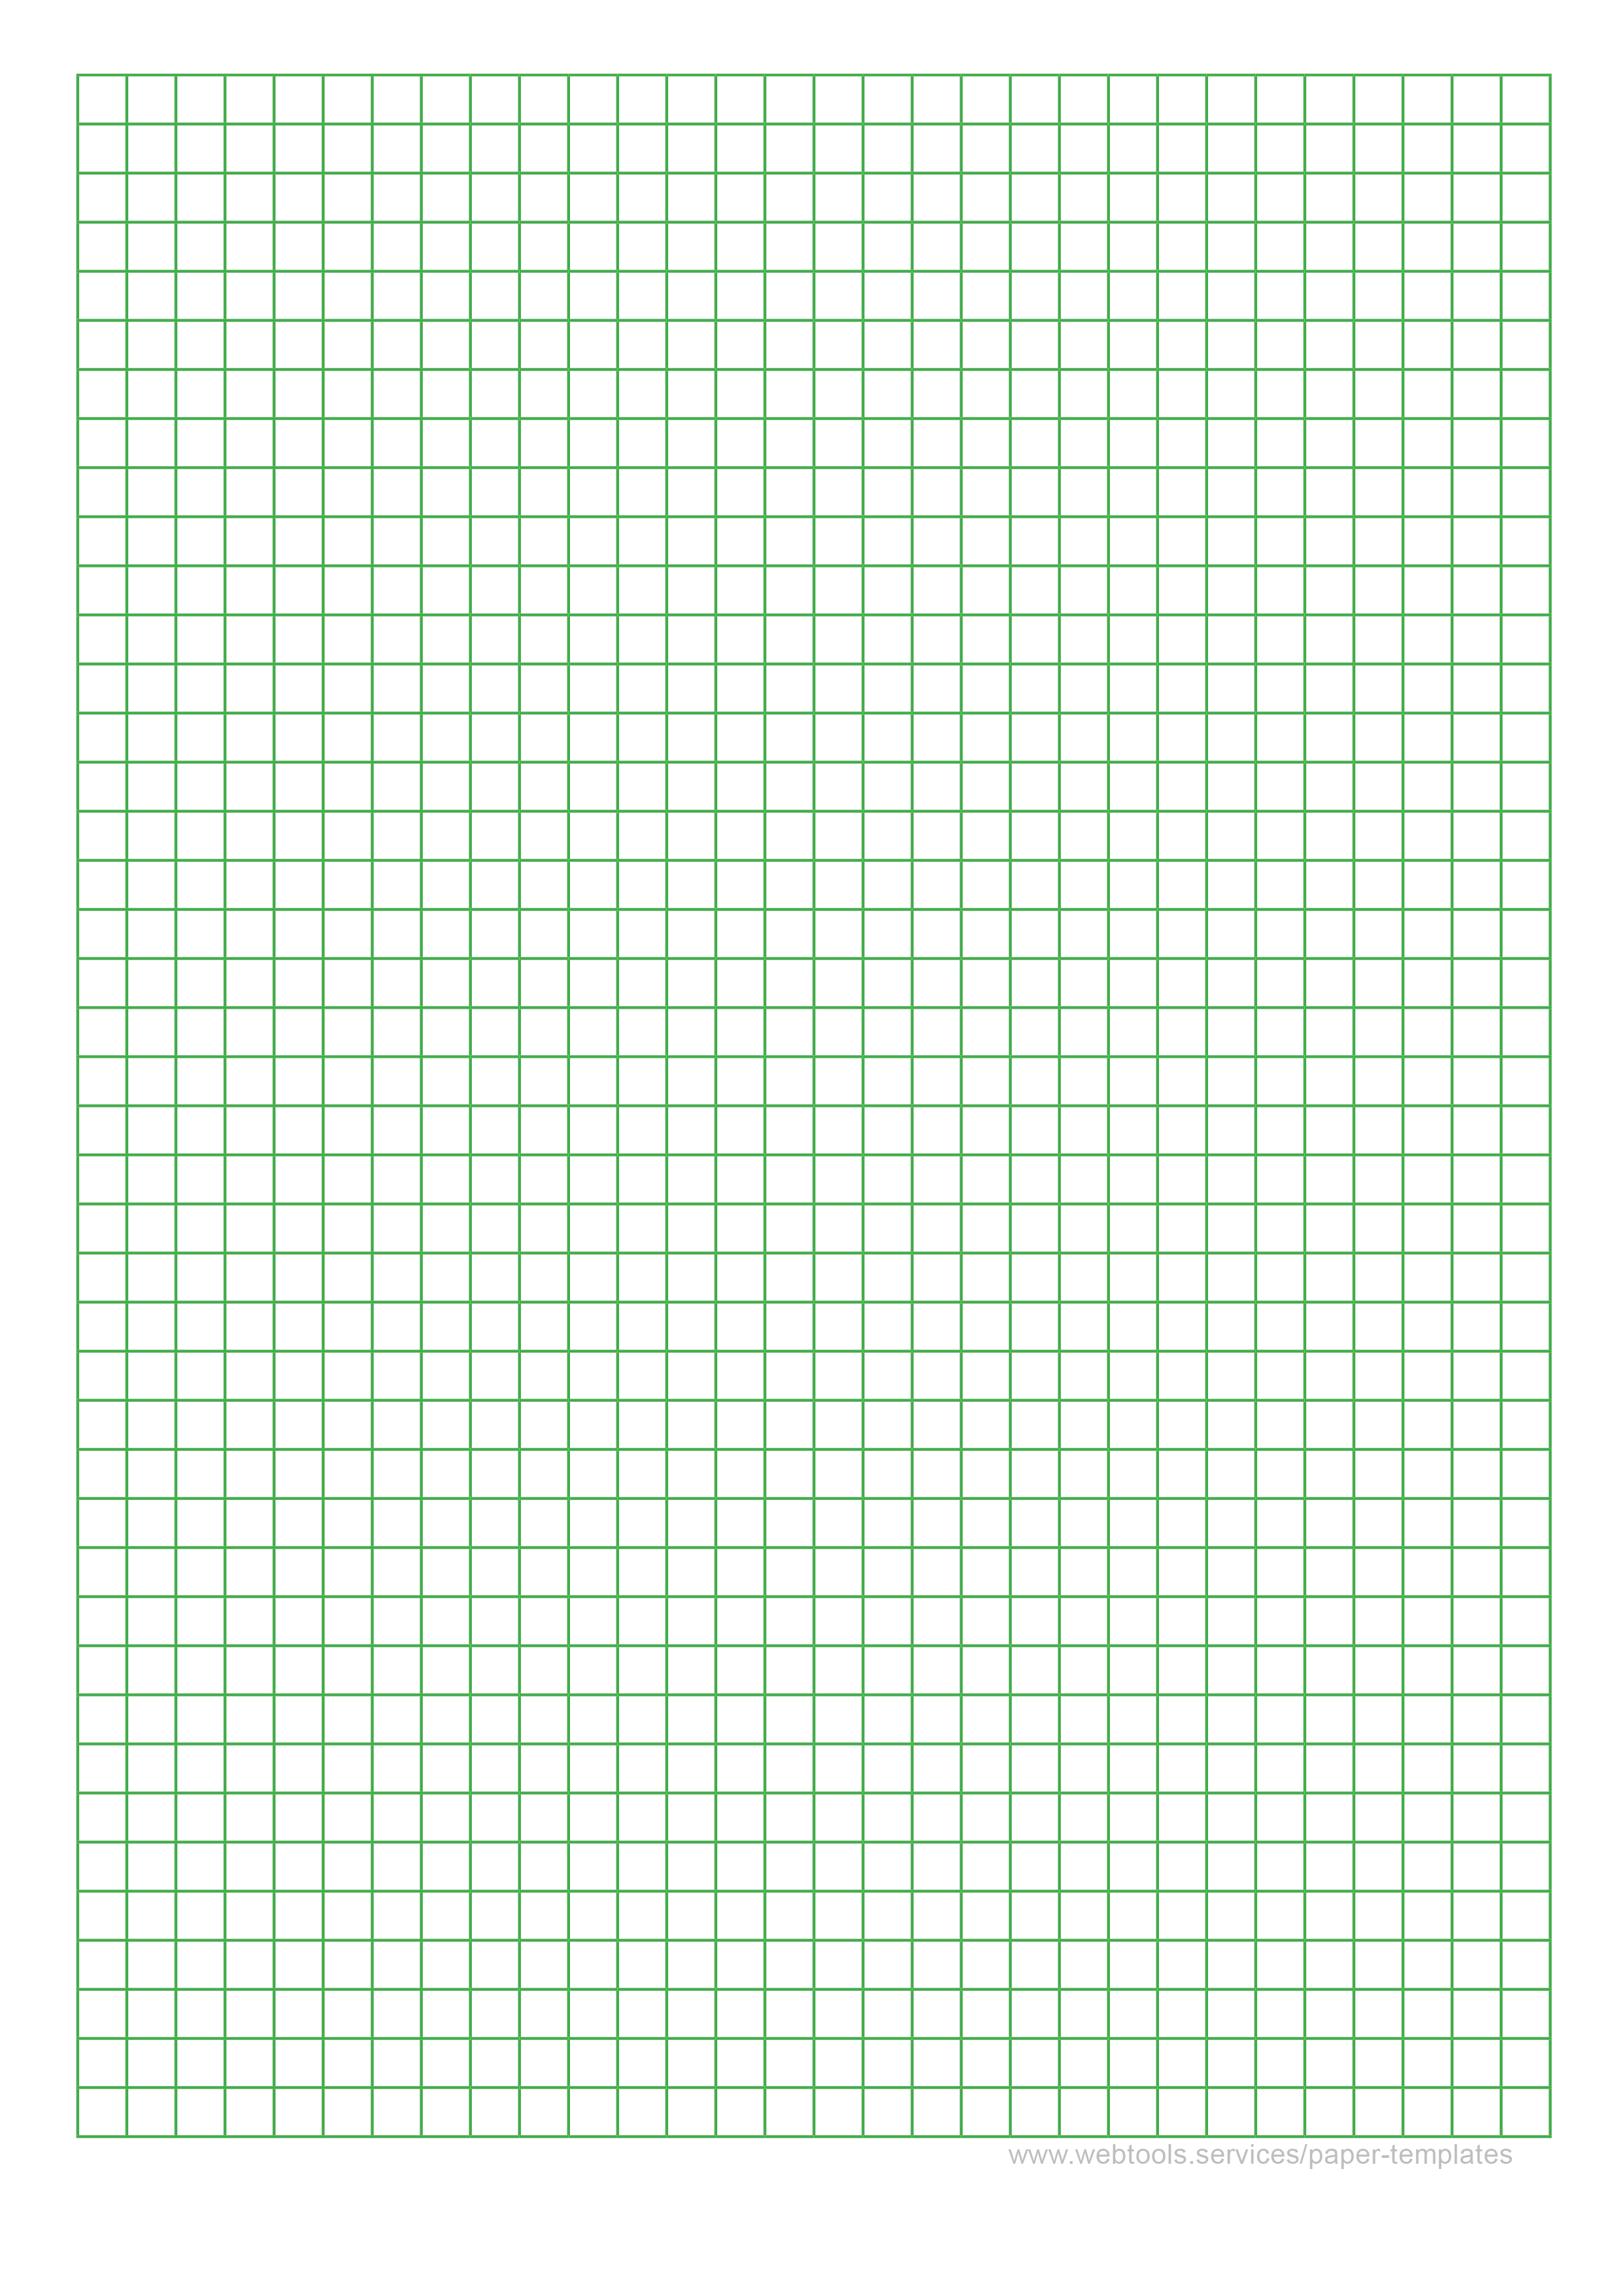 1-inch-graph-paper-free-printable-paper-by-madison-4-free-printable-1